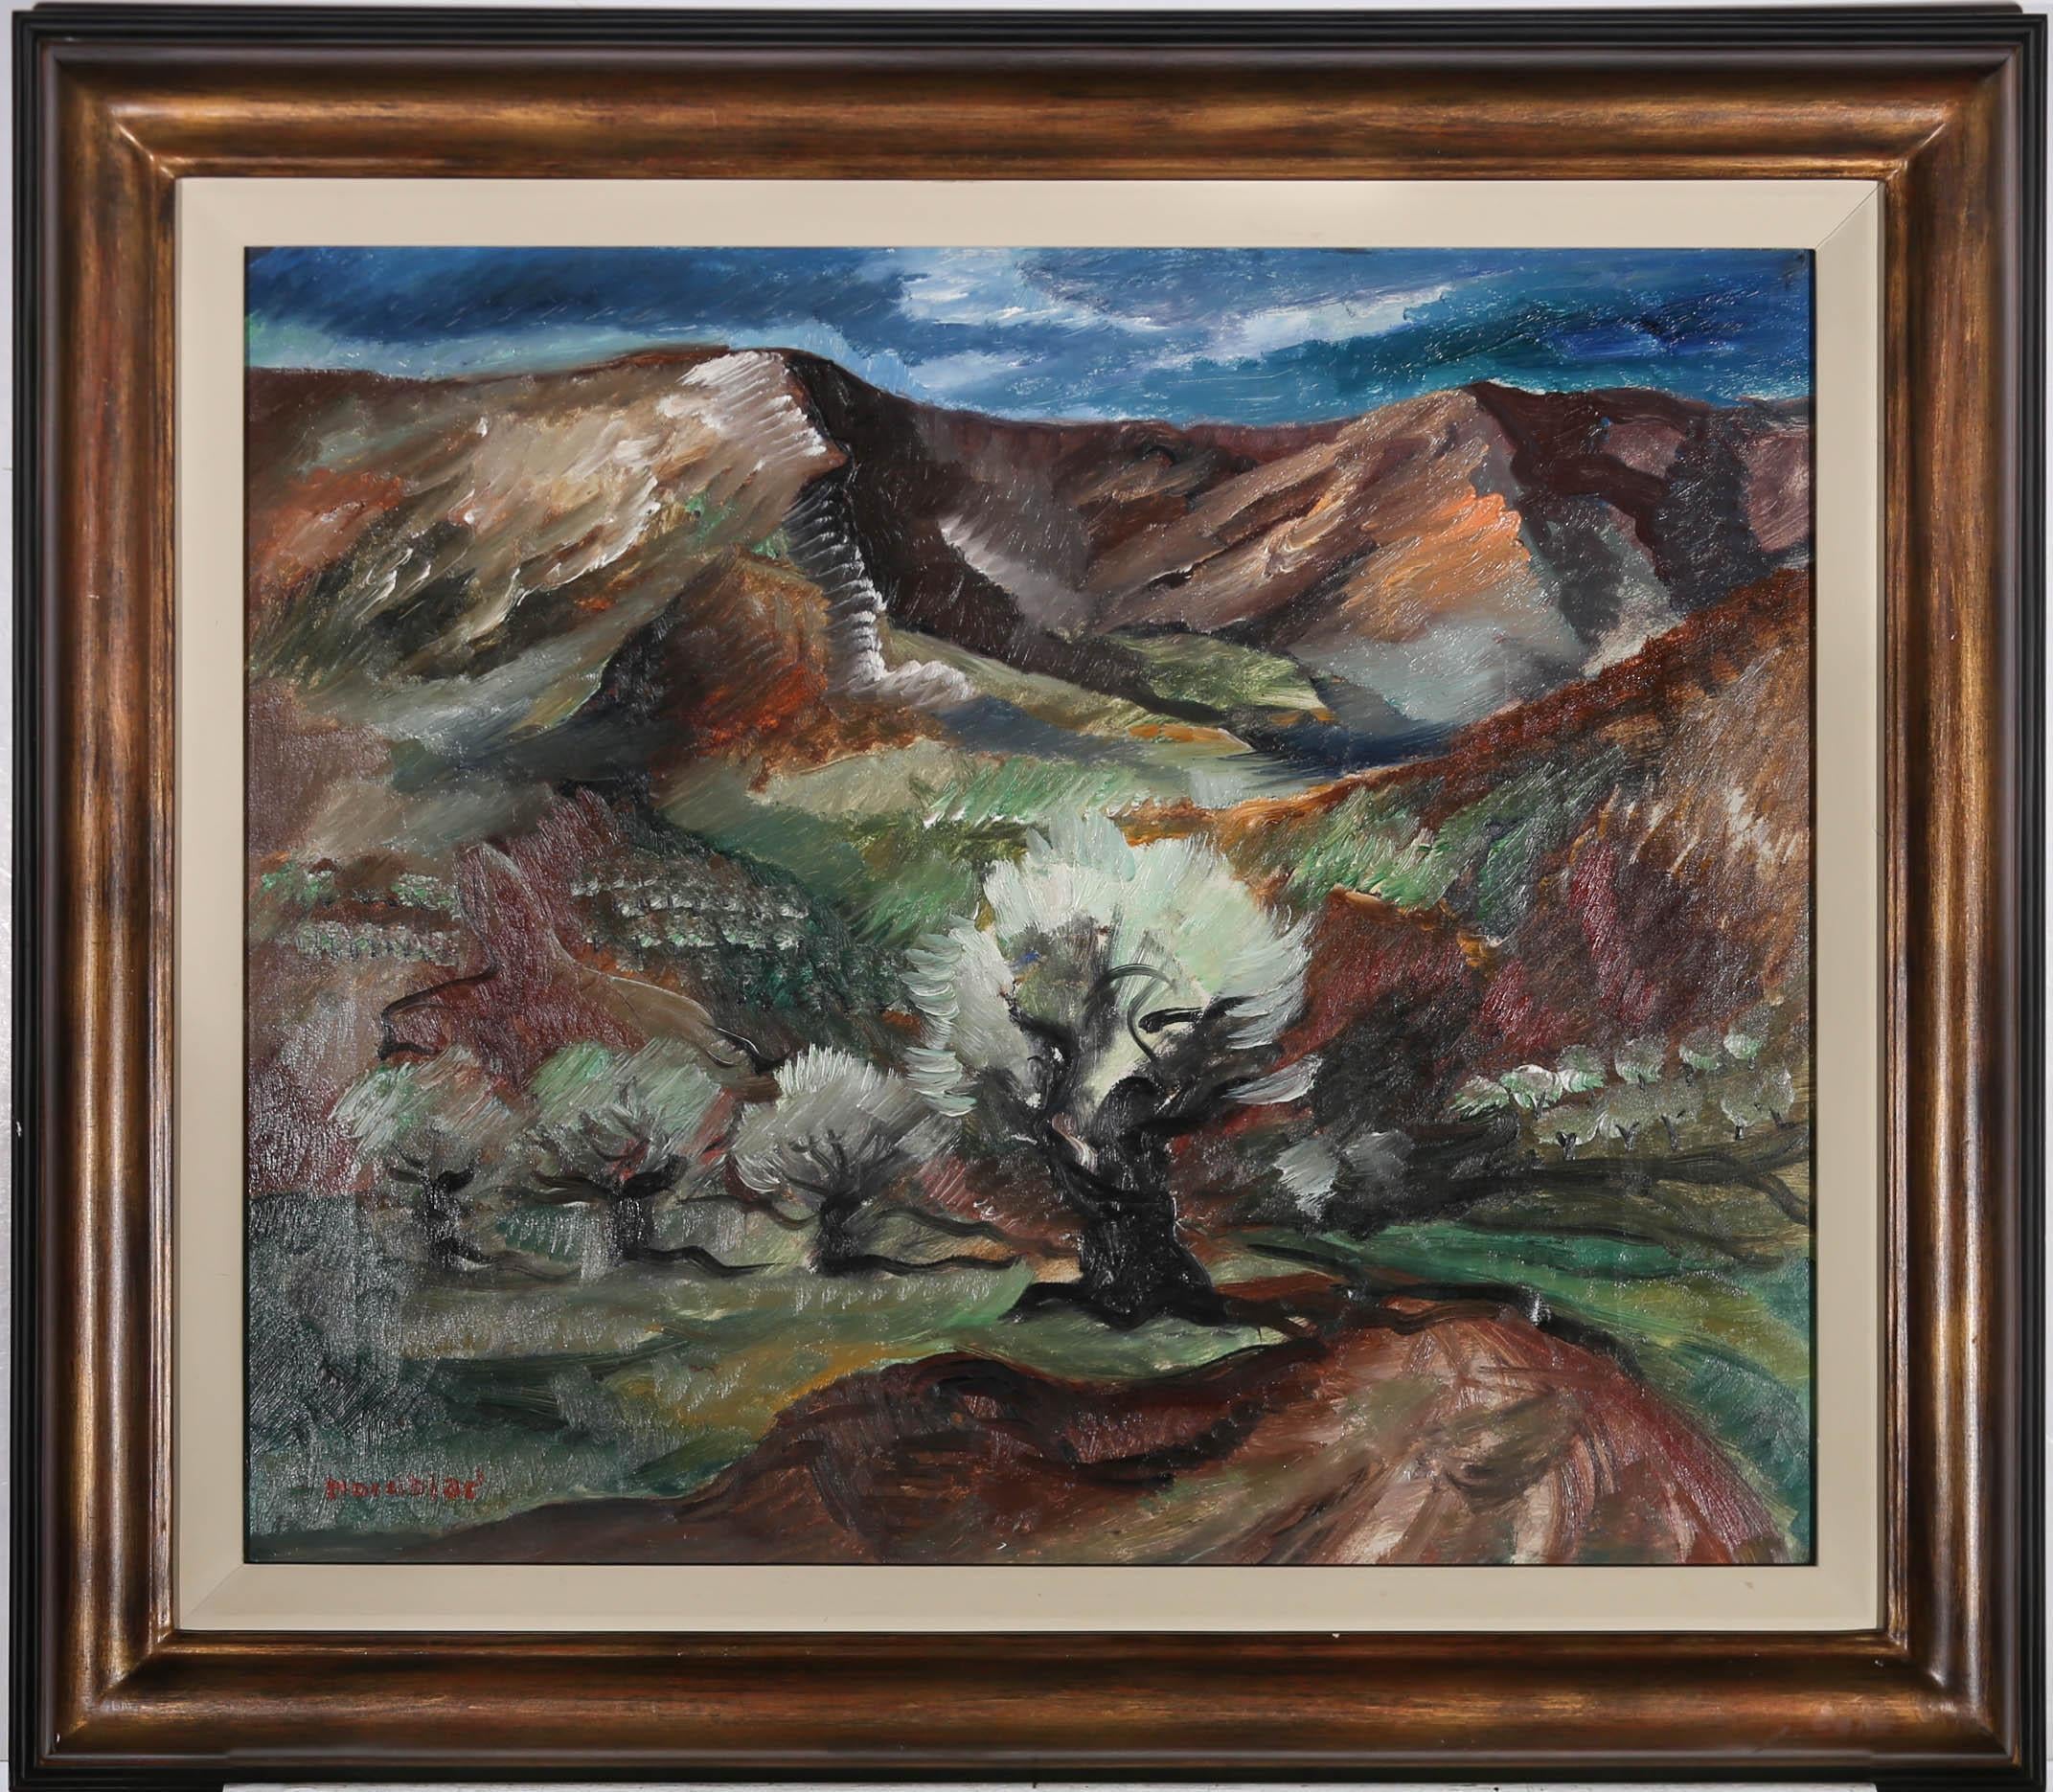 This expressive piece depicts a Norwegian landscape with dramatic mountains and curving paths. The artist captures the scene in an earthy palette and gestural brushstrokes, creating a great sense of movement within the composition. Signed to the